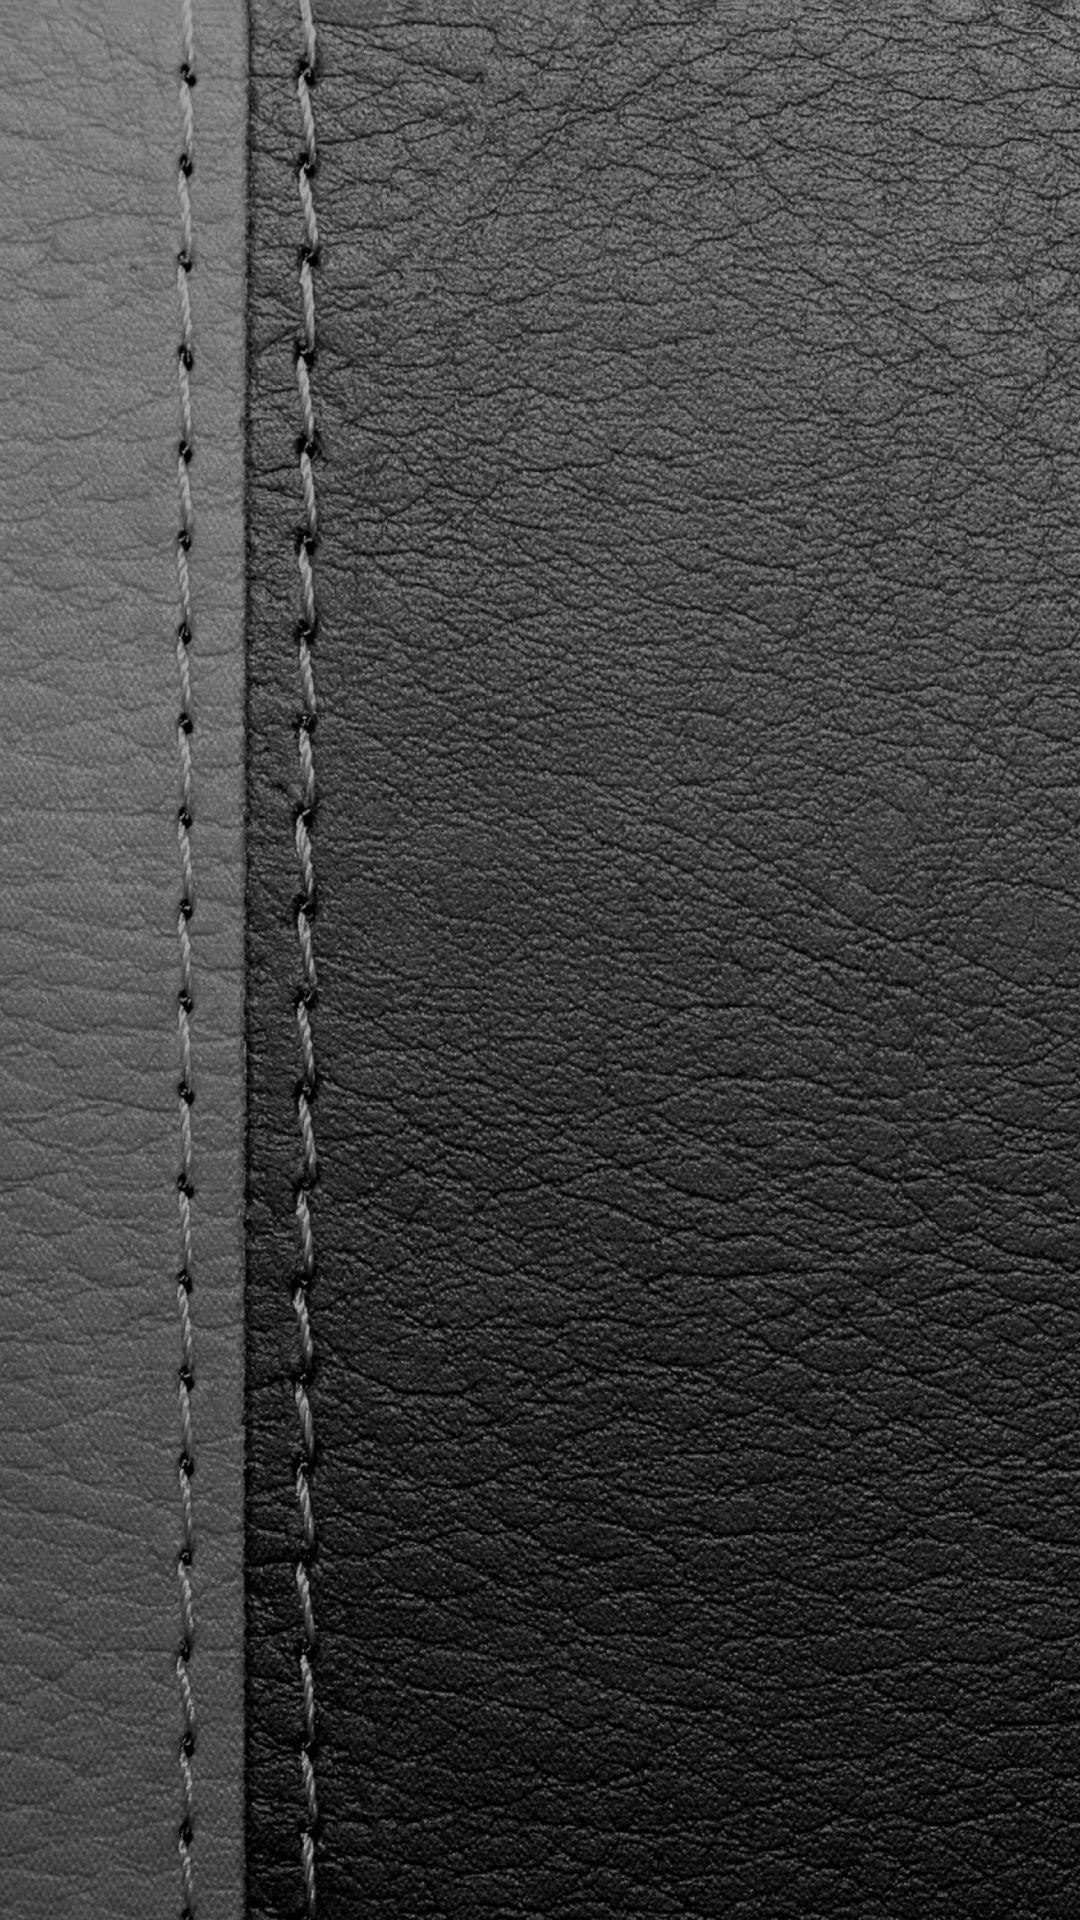 29+ Leather Textures